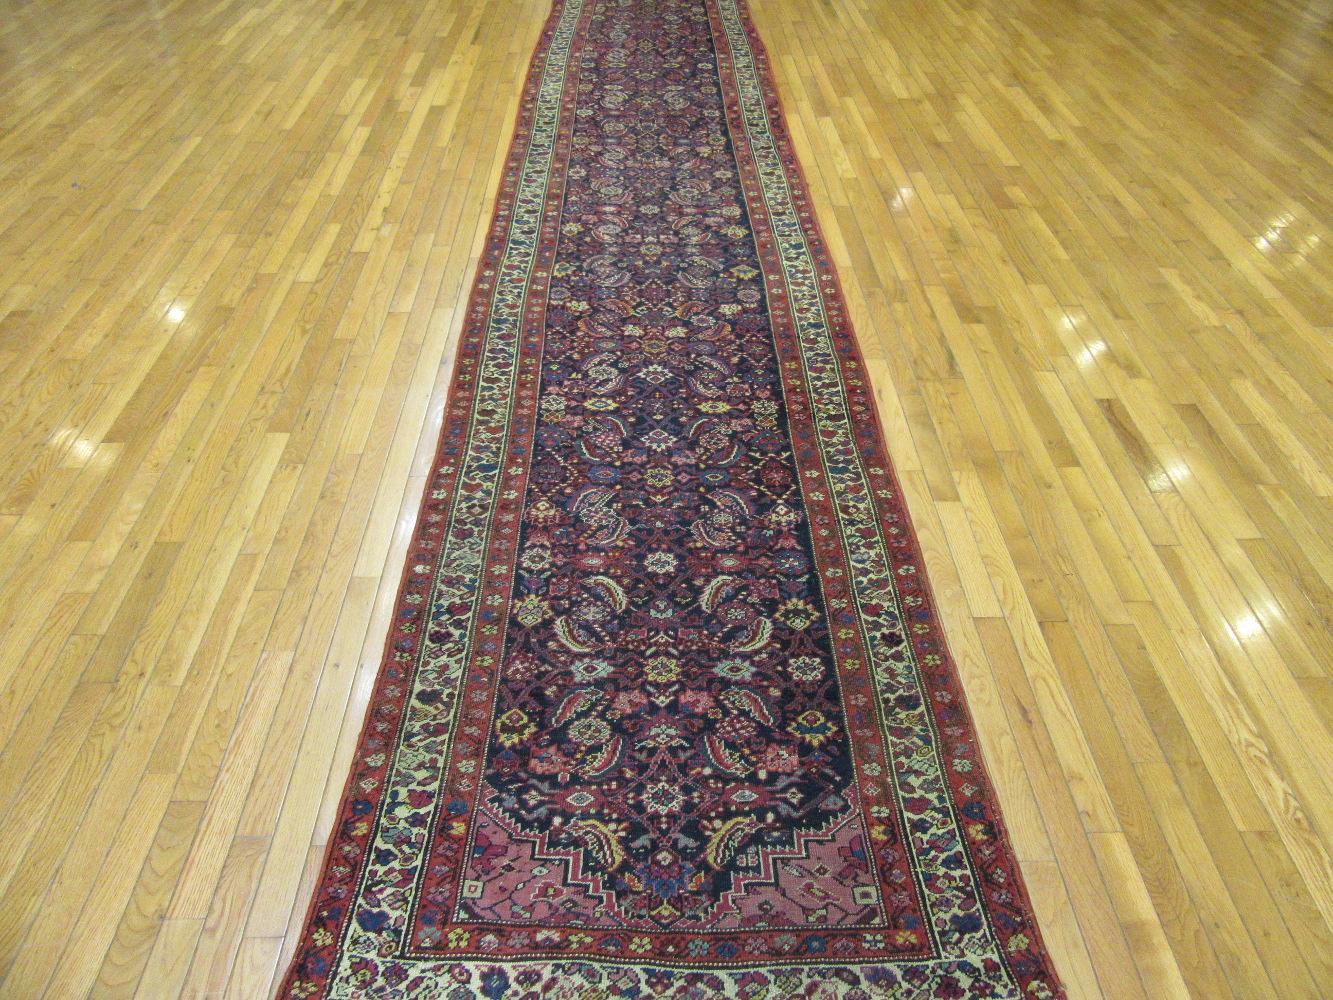 This is a long hand knotted antique Persian Malayer runner rug. It is made with Persian wool colored with natural dyes on a cotton foundation. It has a small scale Herati pattern on a navy blue color background. It would enhance the look of any hall